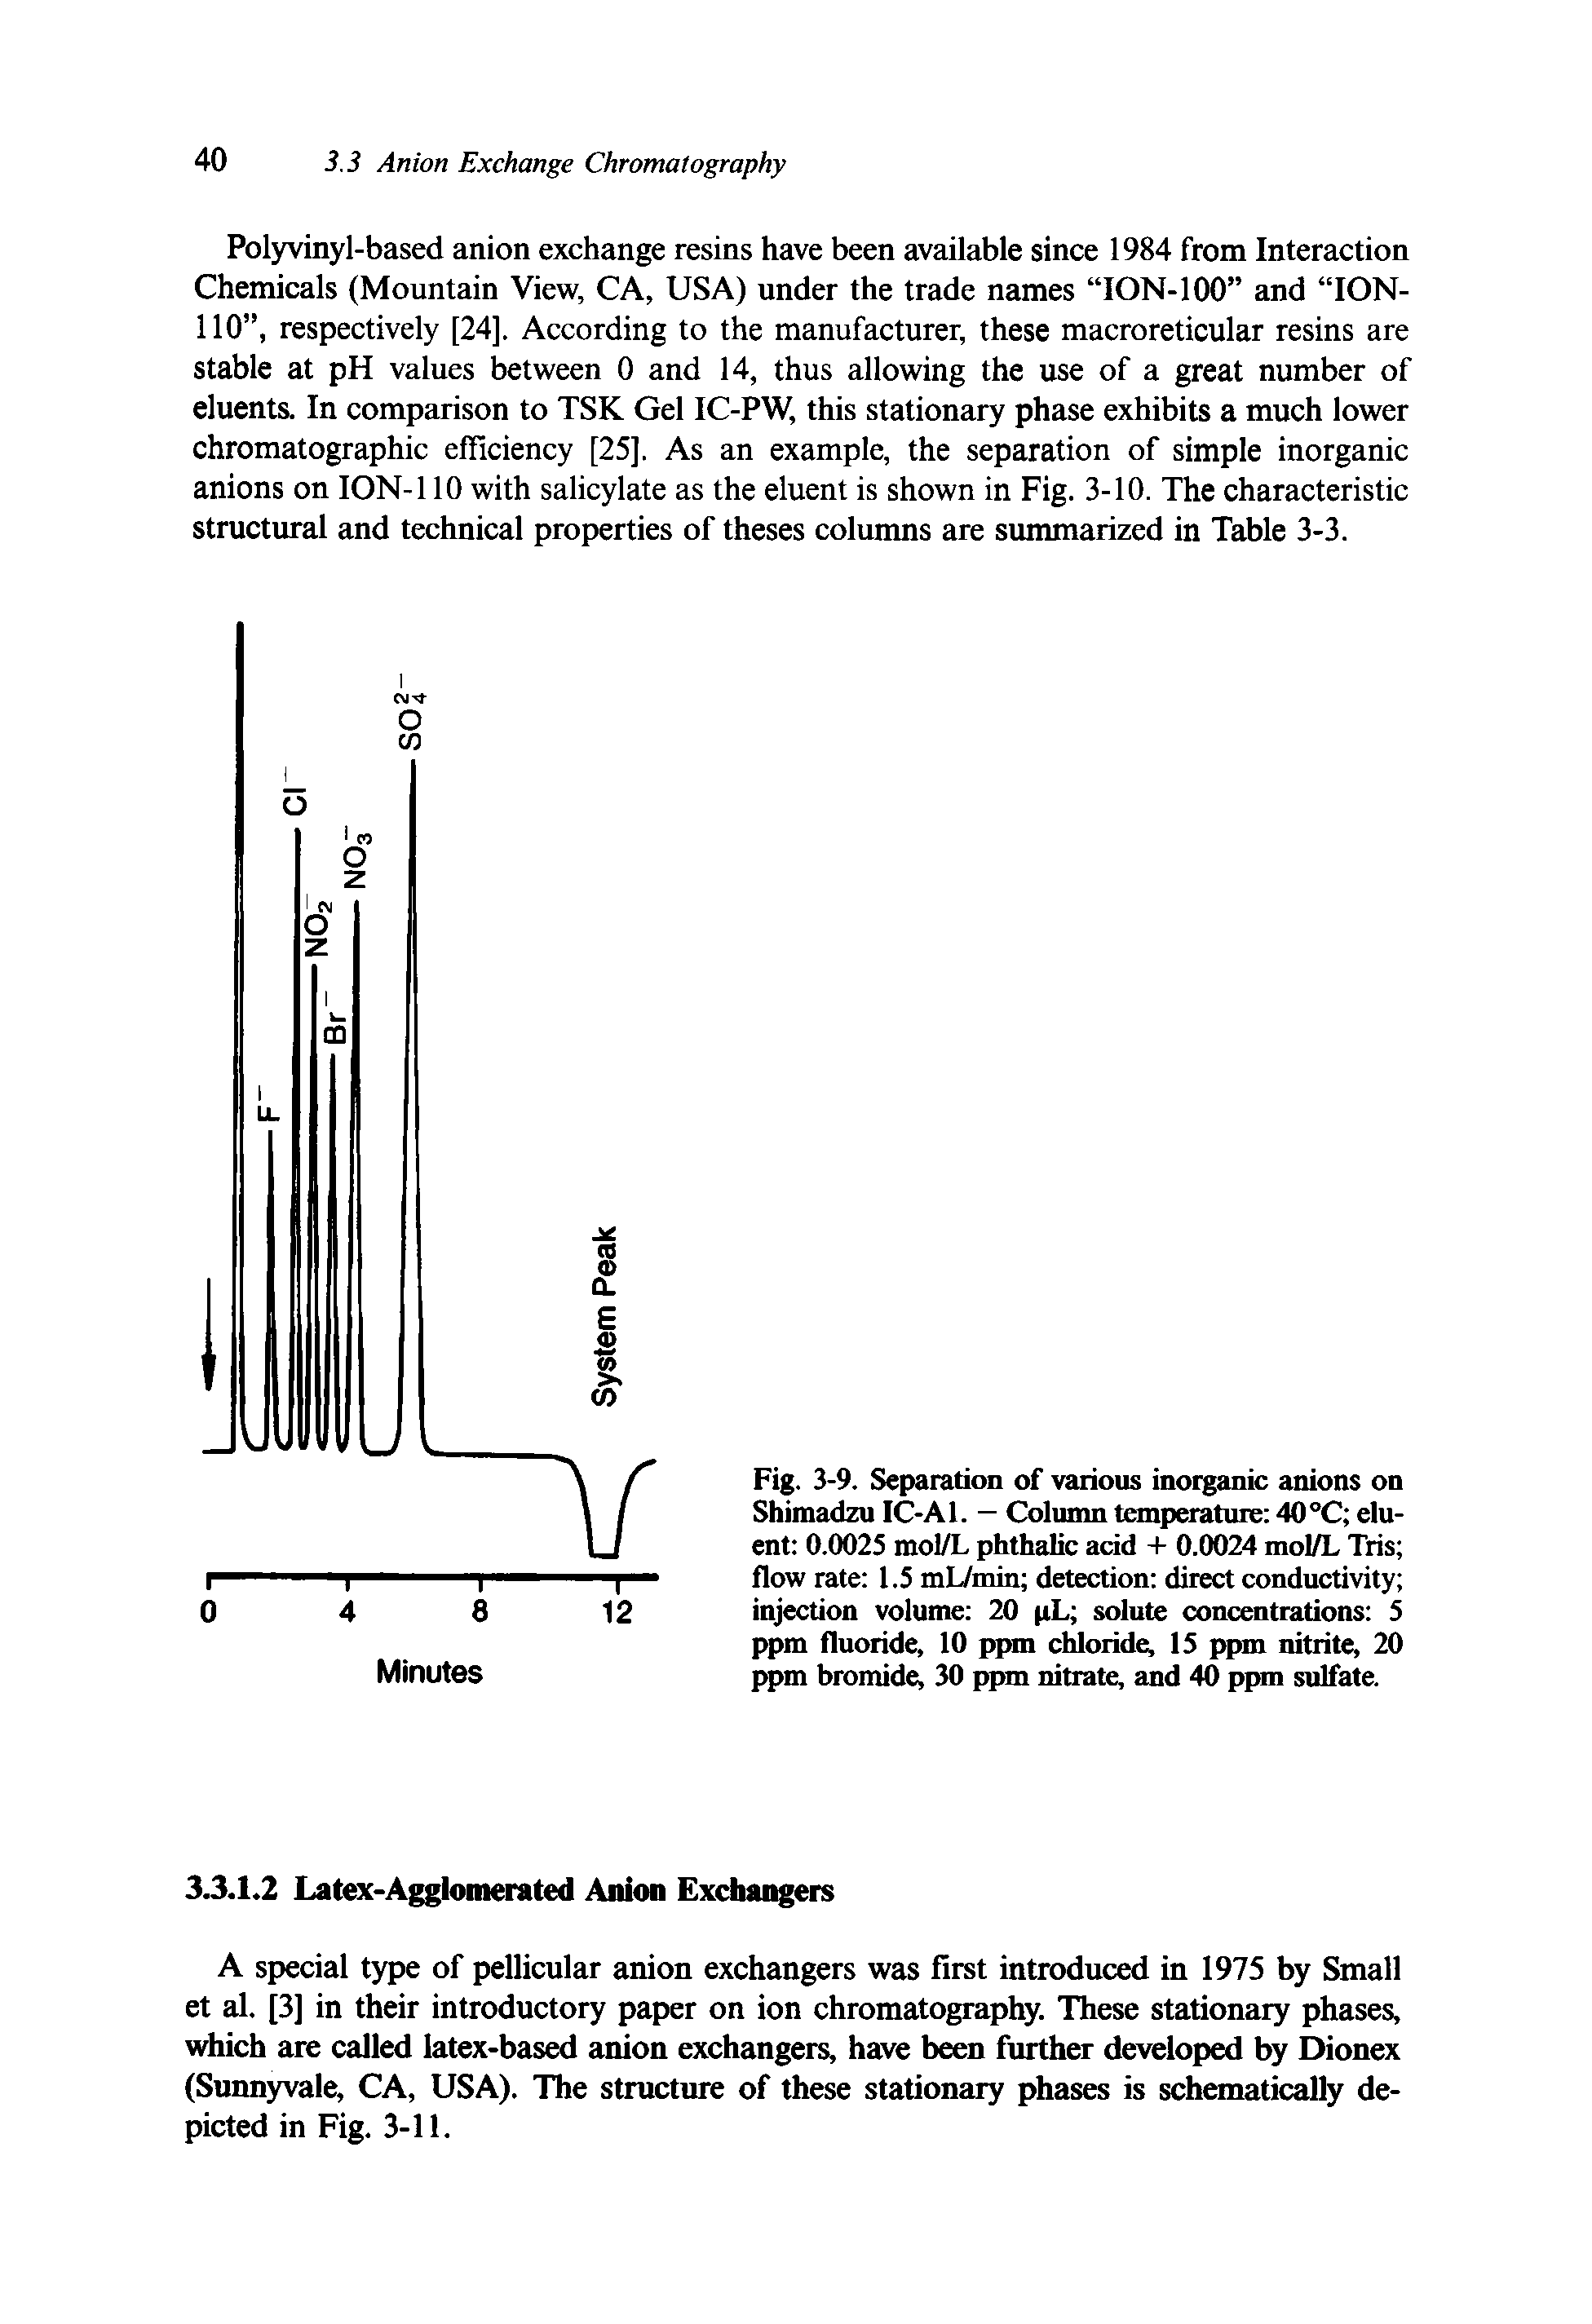 Fig. 3-9. Separation of various inorganic anions on Shimadzu IC-A1. — Column temperature 40 °C eluent 0.0025 mol/L phthalic acid + 0.0024 mol/L Tris flow rate 1.5 mL/min detection direct conductivity injection volume 20 pL solute concentrations 5 ppm fluoride, 10 ppm chloride, 15 ppm nitrite, 20 ppm bromide, 30 ppm nitrate, and 40 ppm sulfate.